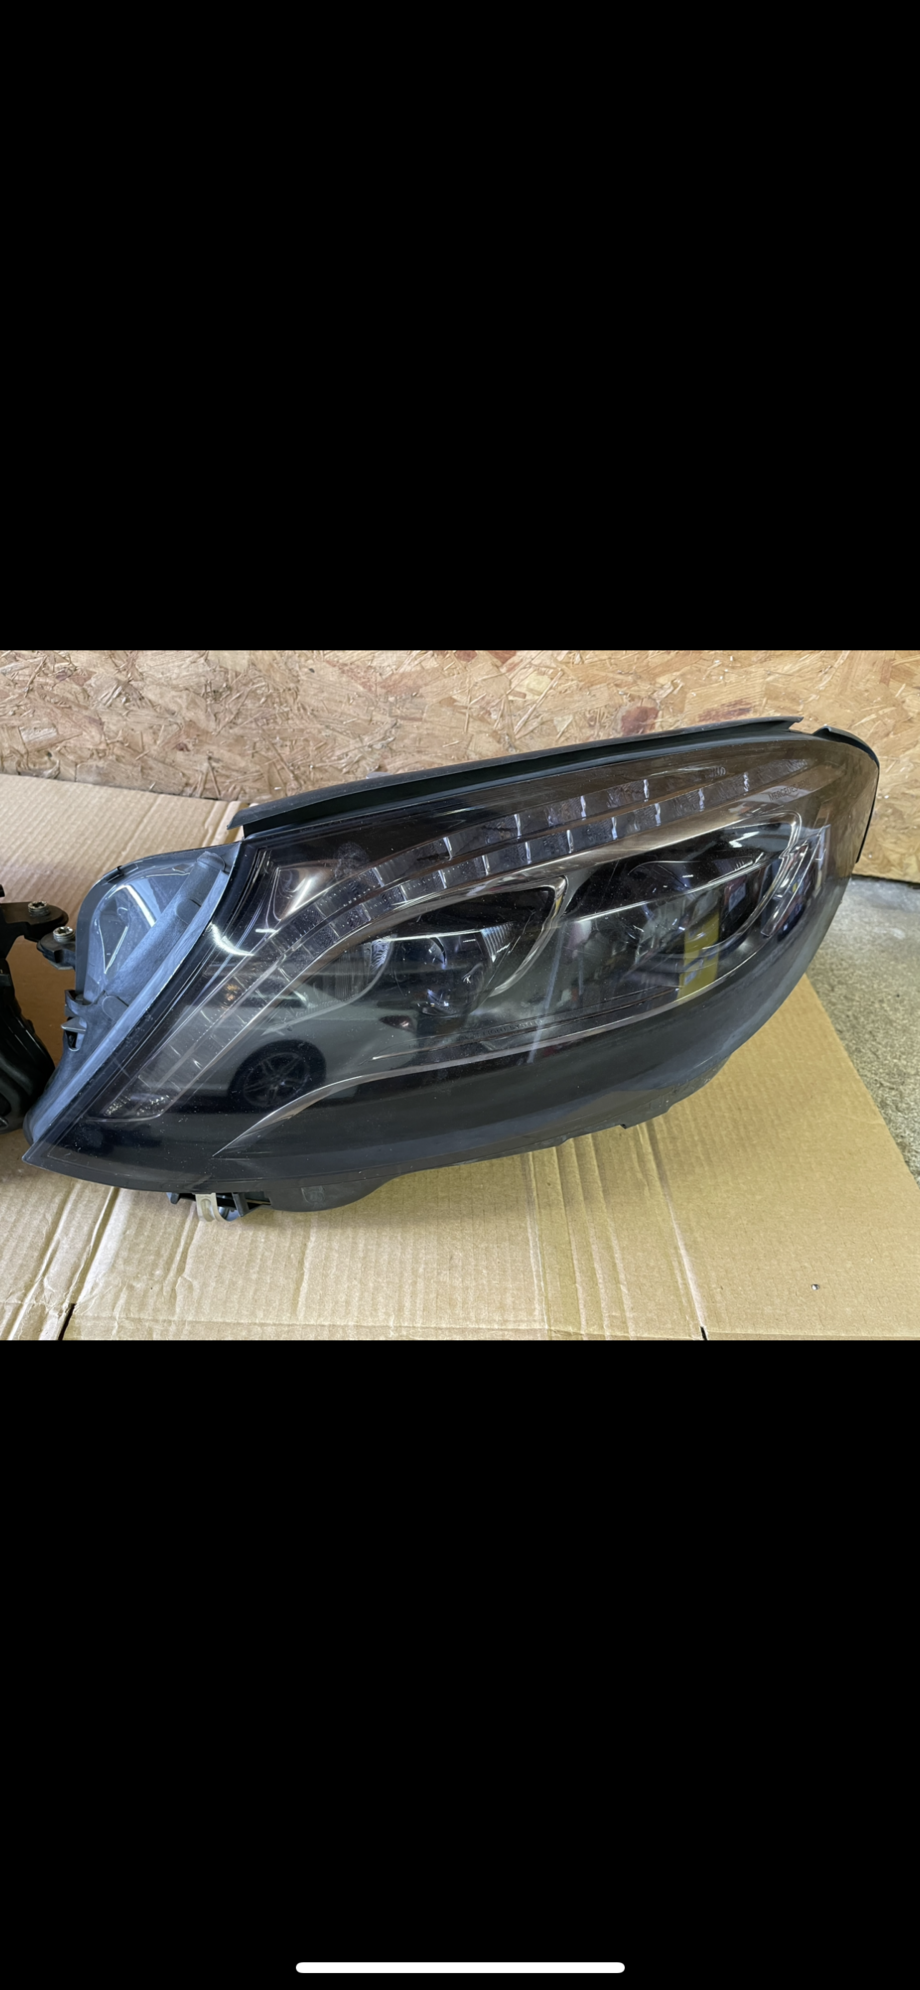 Lights - S63 w222 Headlamps (complete set) - Used - 2014 to 2017 Mercedes-Benz S63 AMG - Boston, MA 02122, United States